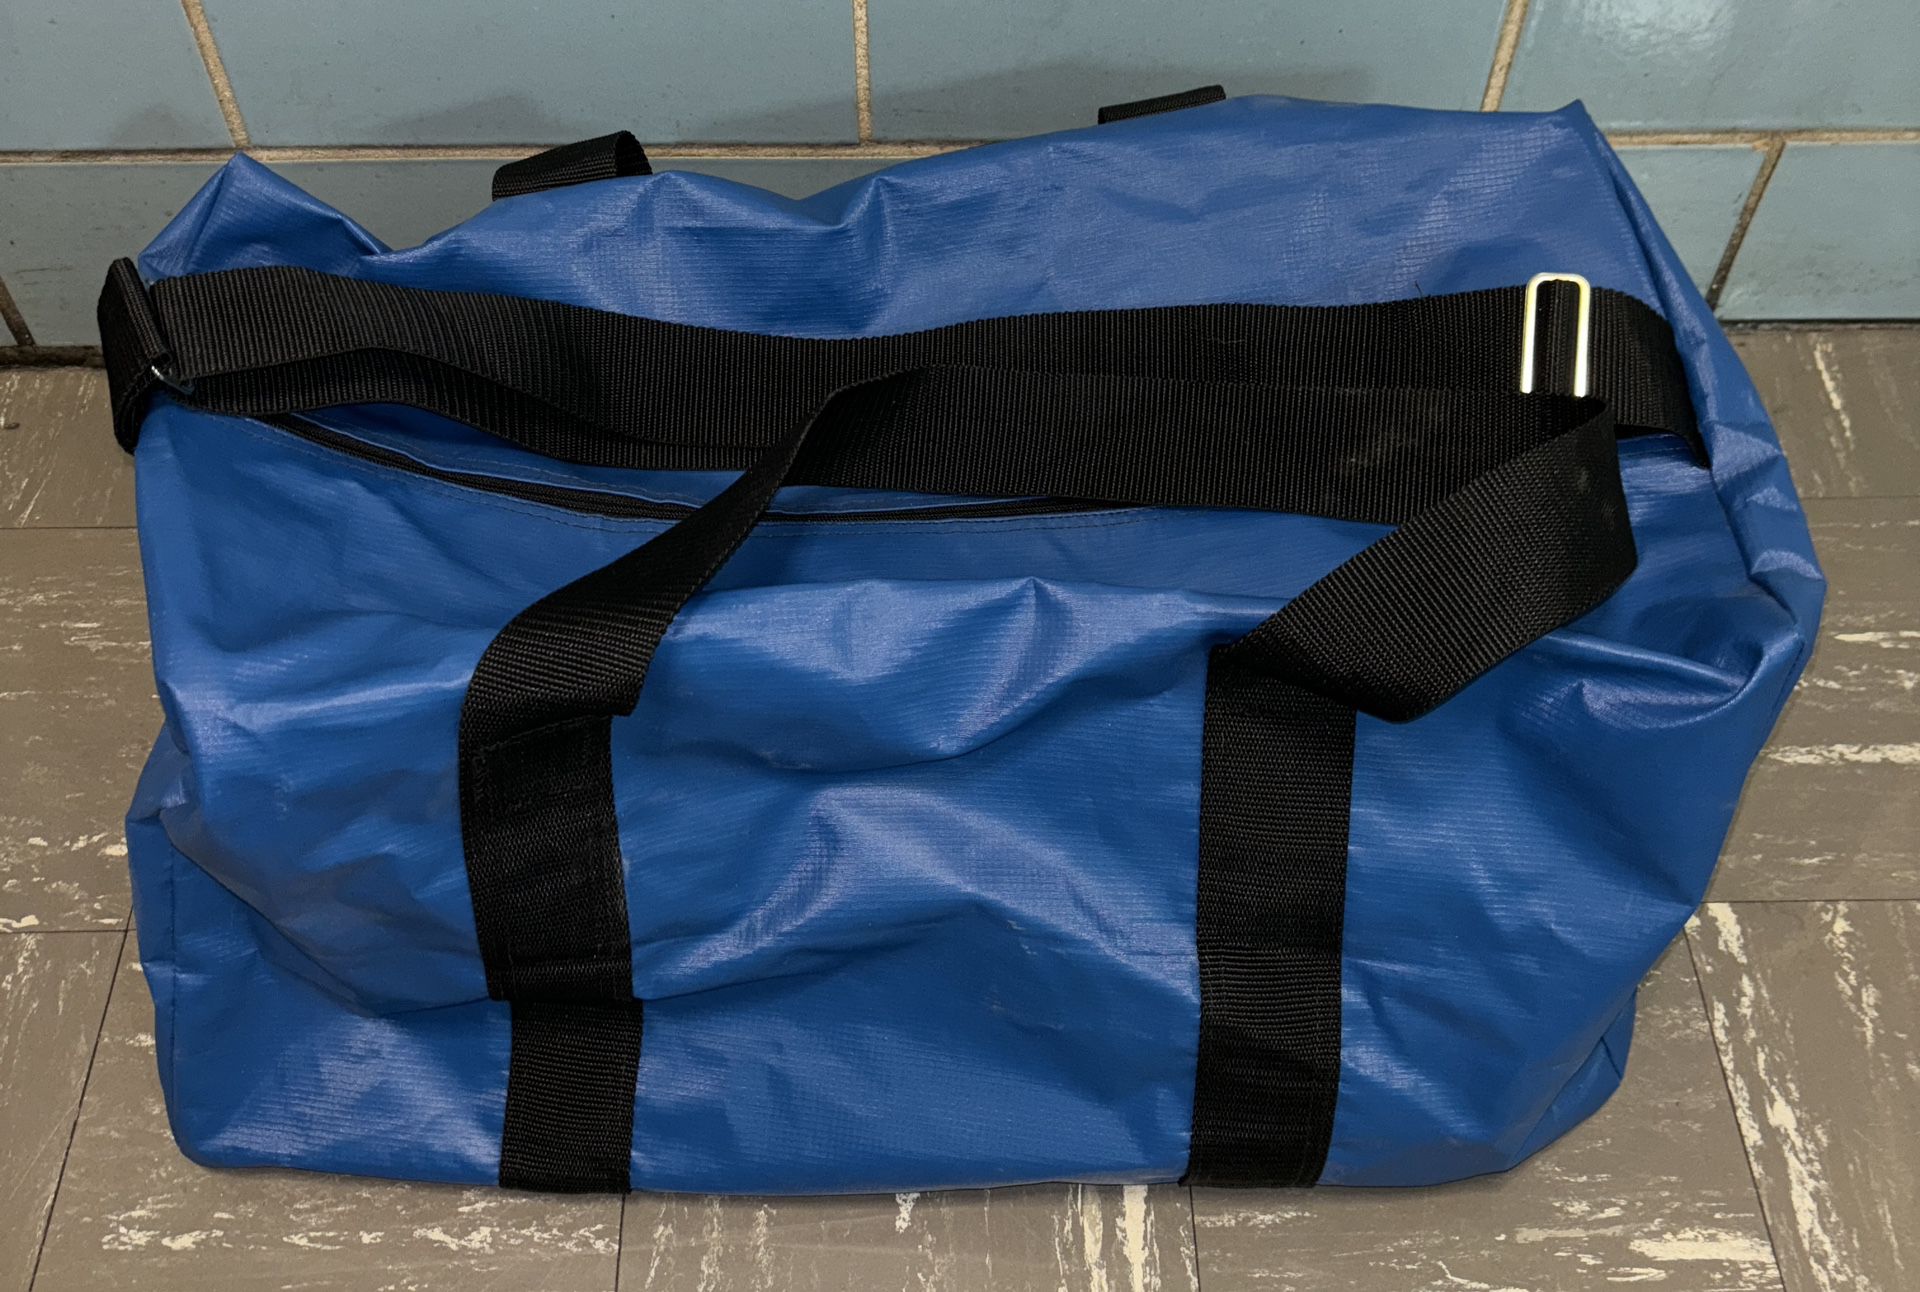 Blue Waterproof Duffel Bag 22x12x12 inches Food Delivery Uber Grub Hub Seamless Moped Scooter